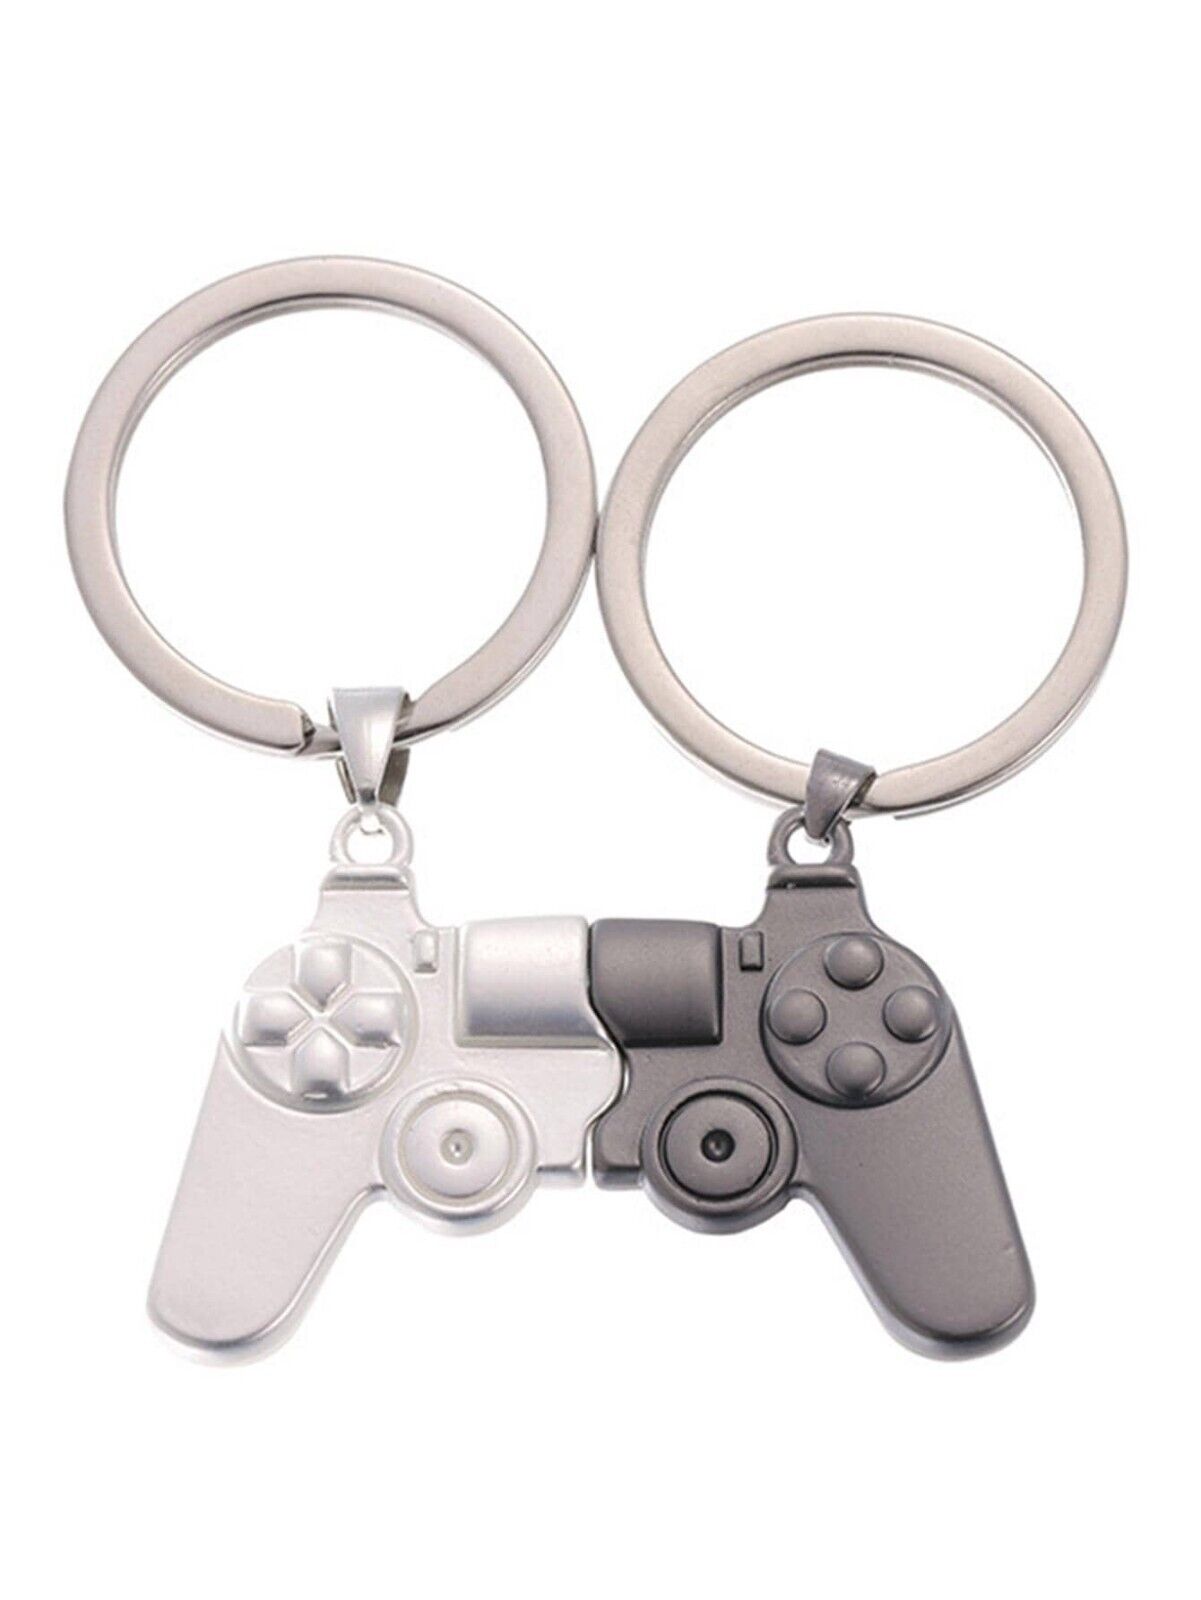 2pcs Couple Game Controller Charm Creative keychain For Key Decoration